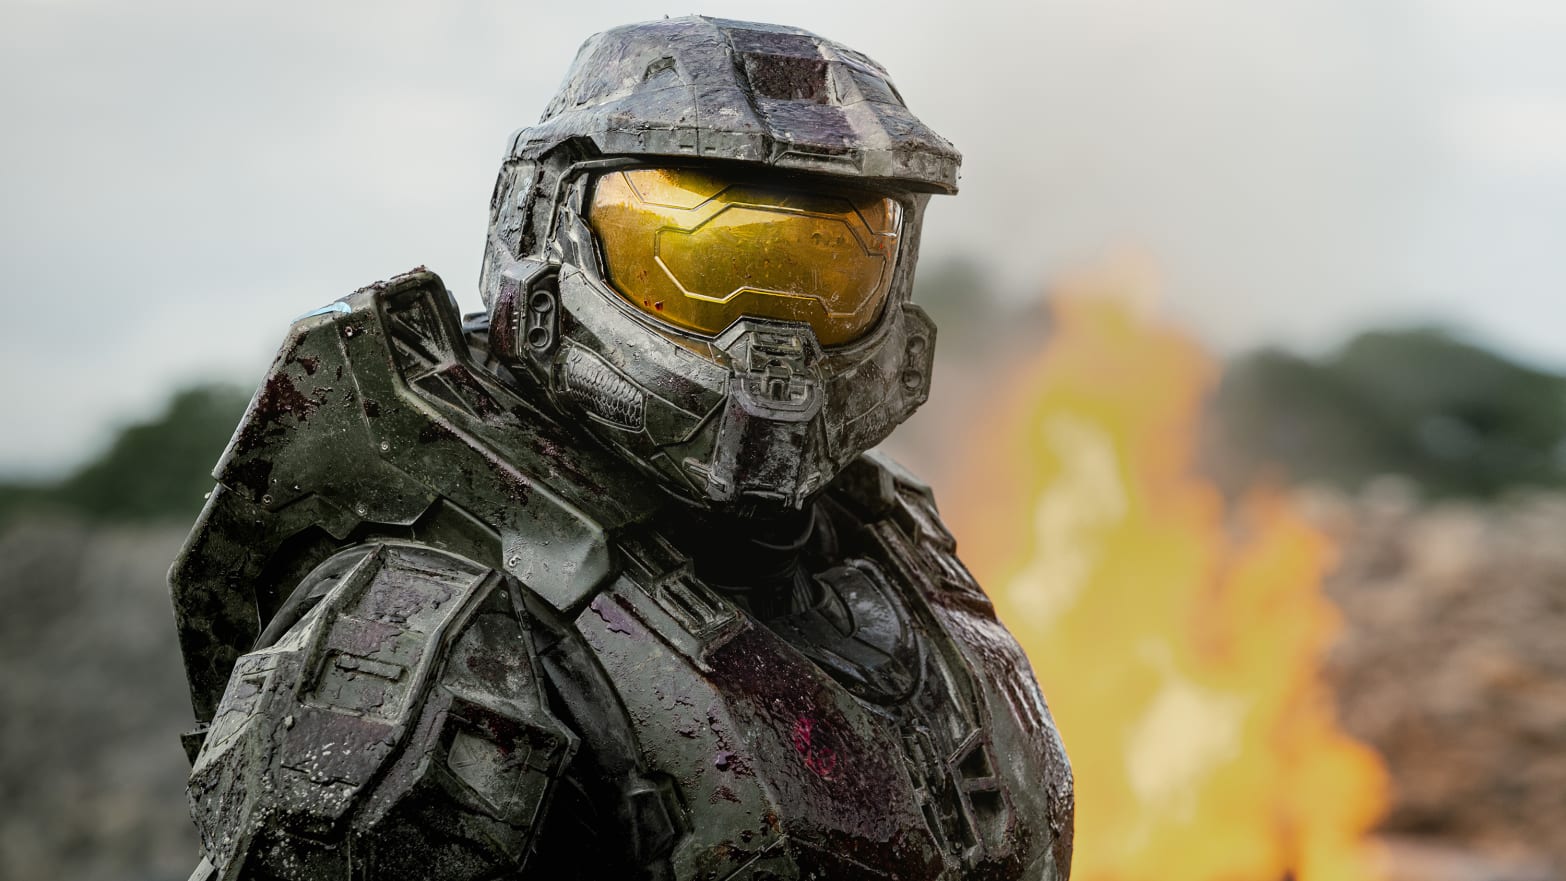 The Halo TV series has entered full production - Halo: The Master